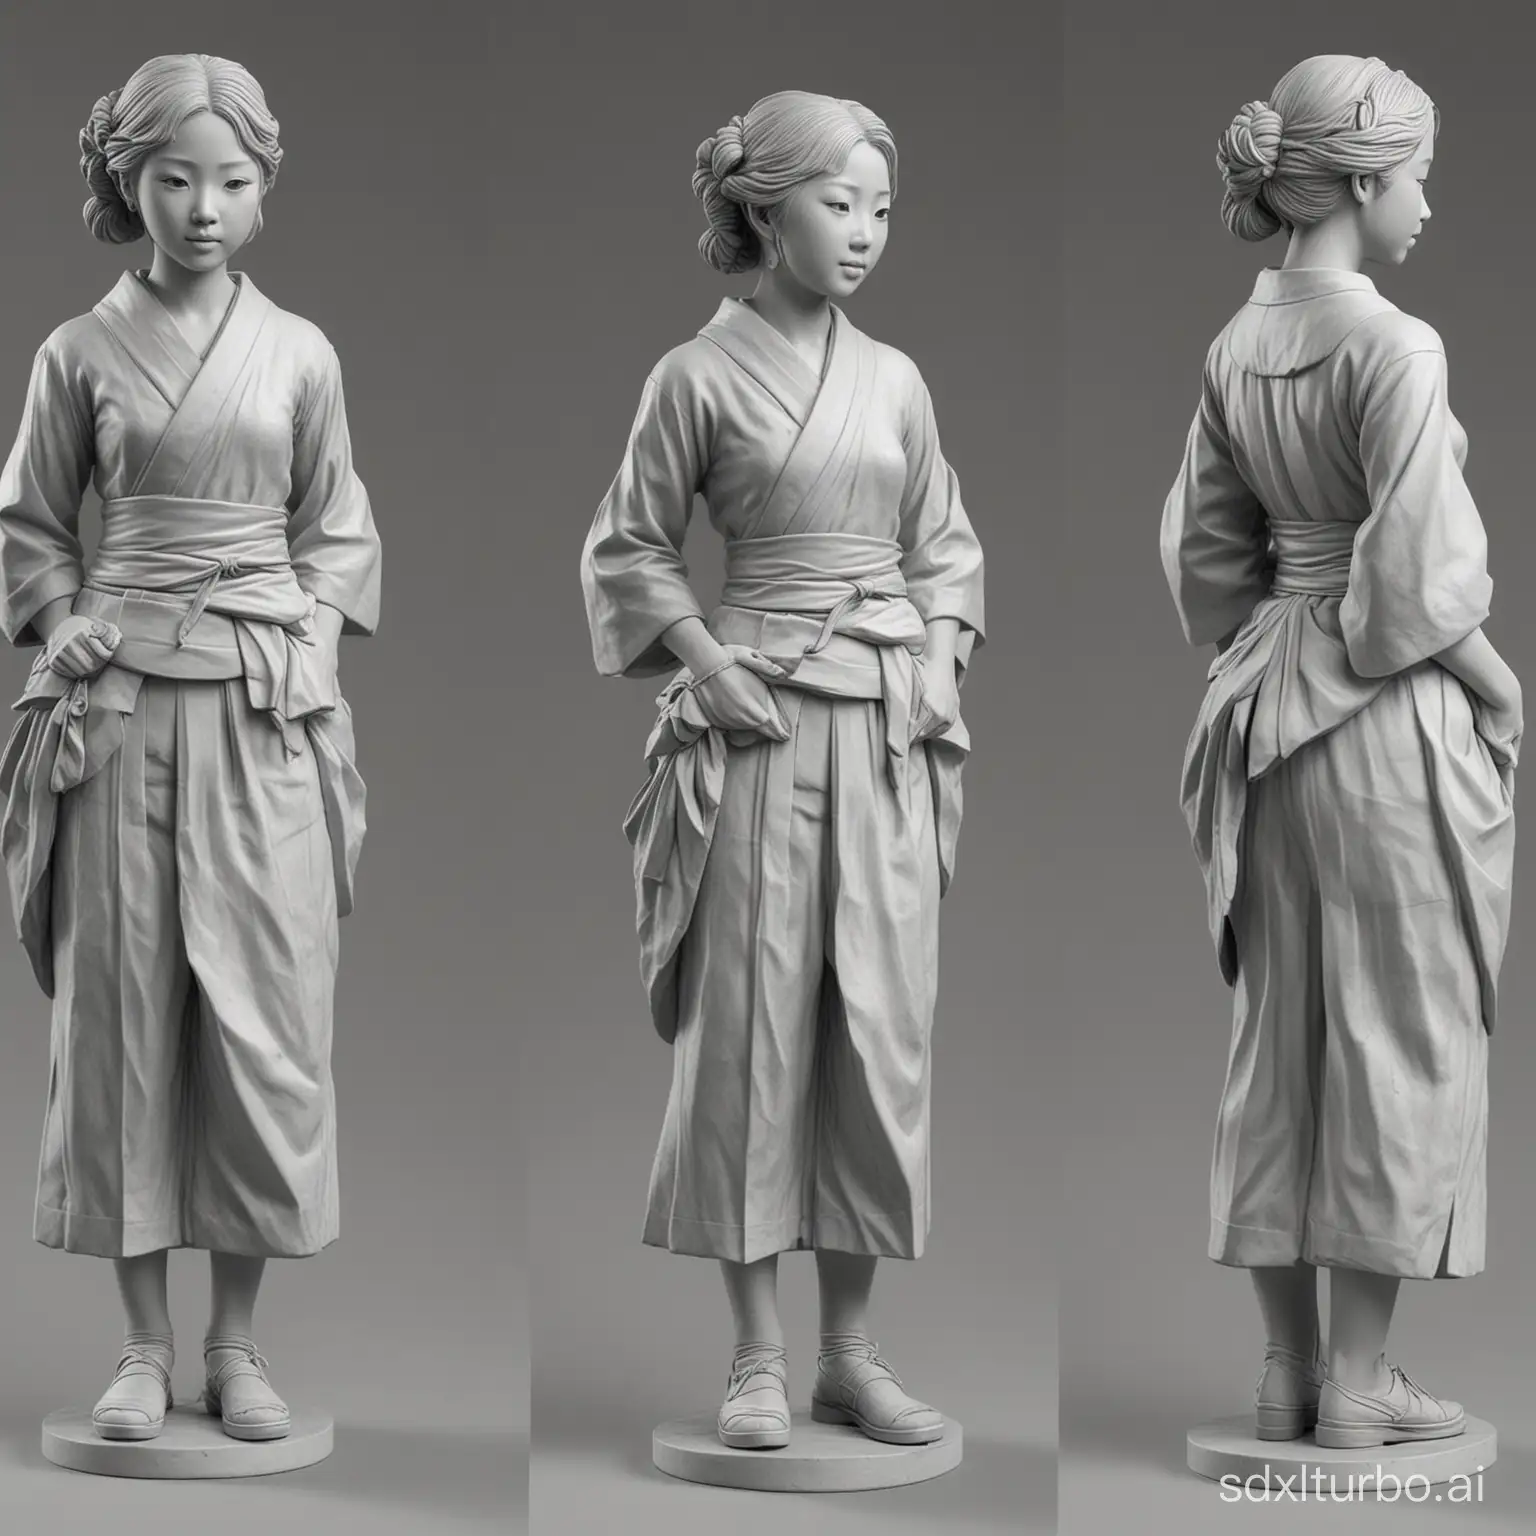 Generate three views, one is the front view, two is the left view, and three is the rear view. The 3D colorless gray model plaster sculpture depicts a Japanese girl, Sailor dress